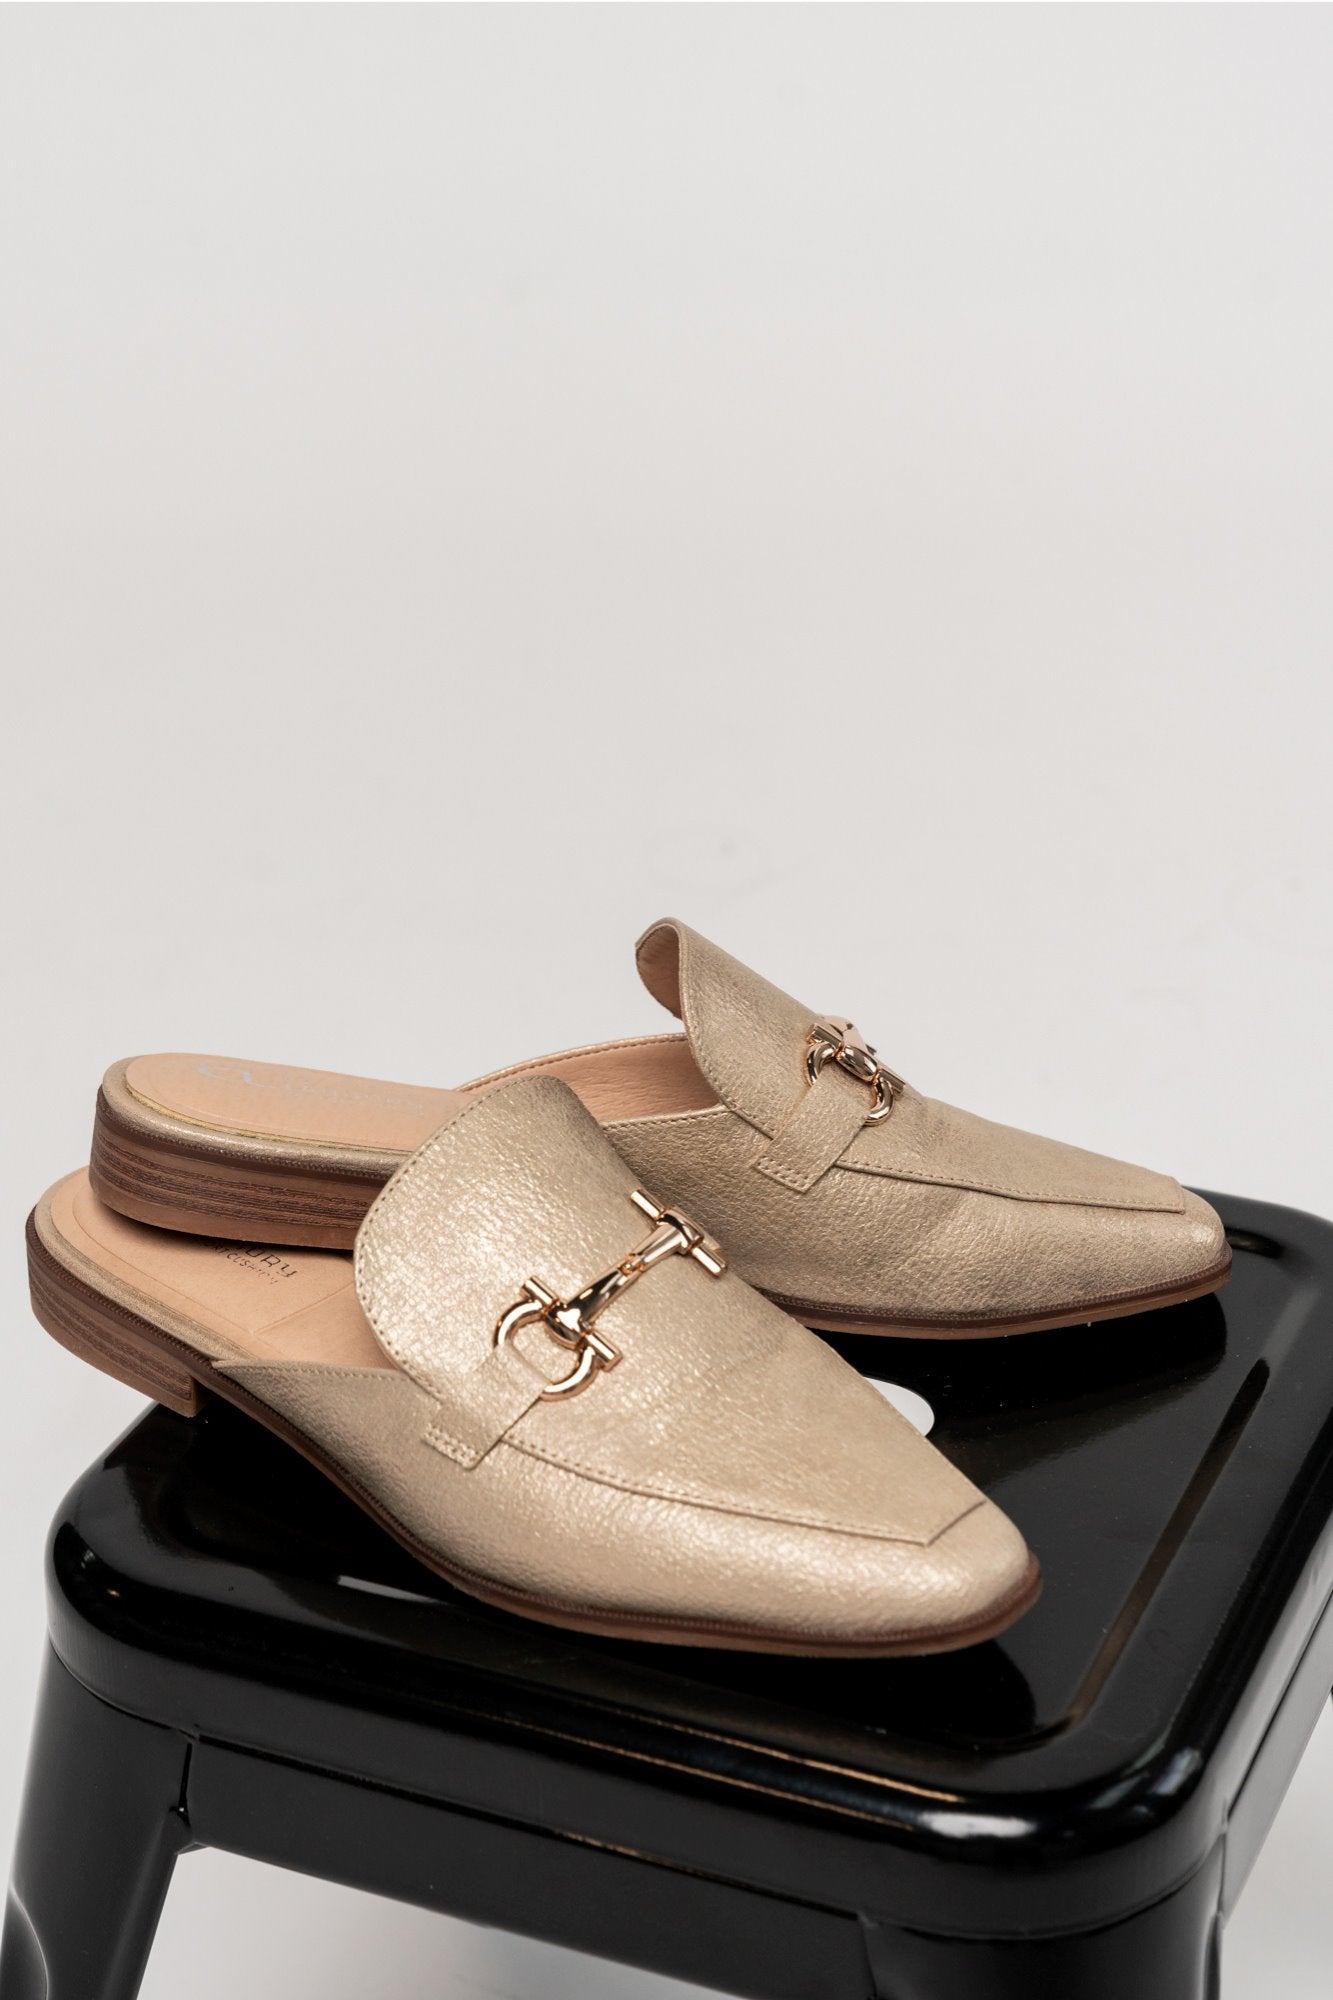 Murphy Mules in Gold Holley Girl 